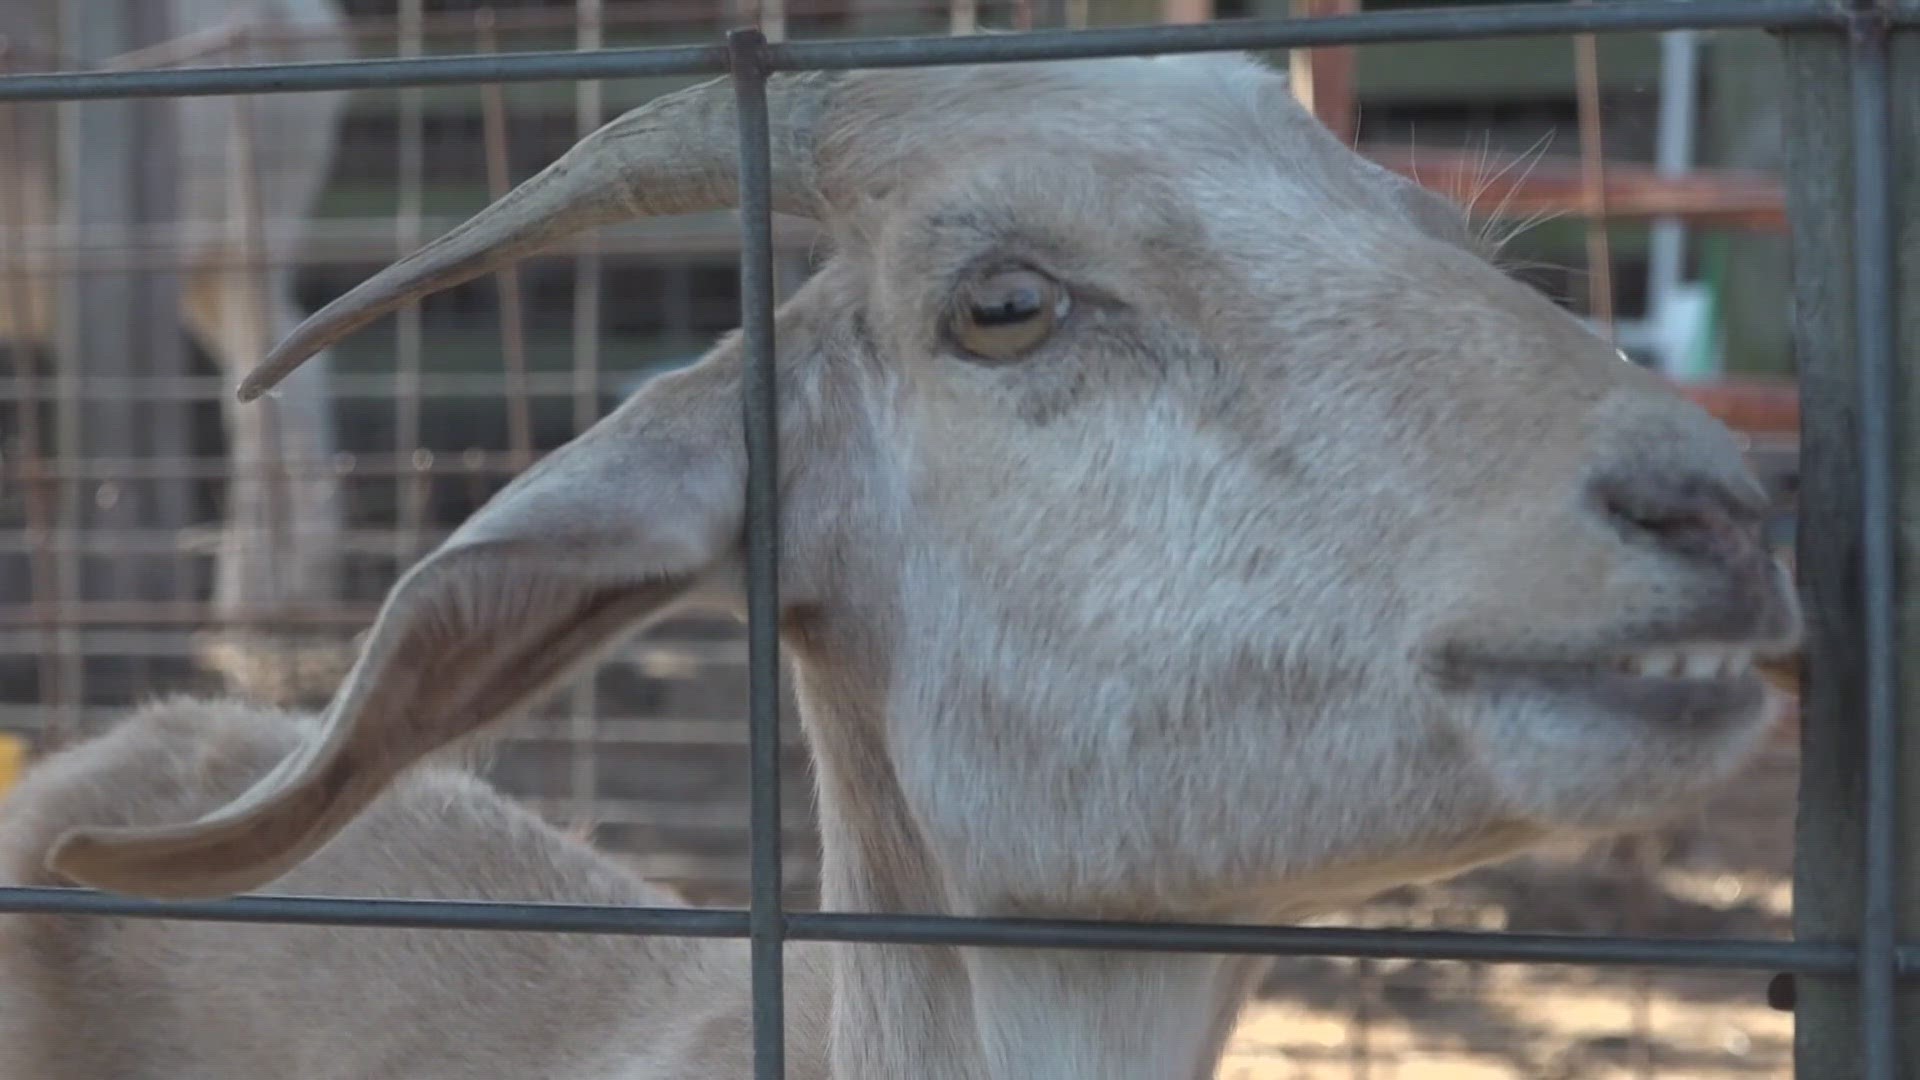 During a reunion for the USS Davis in Jacksonville, a Navy veteran recounted a story of needing to store goats from a foreign country on the deck of a ship.